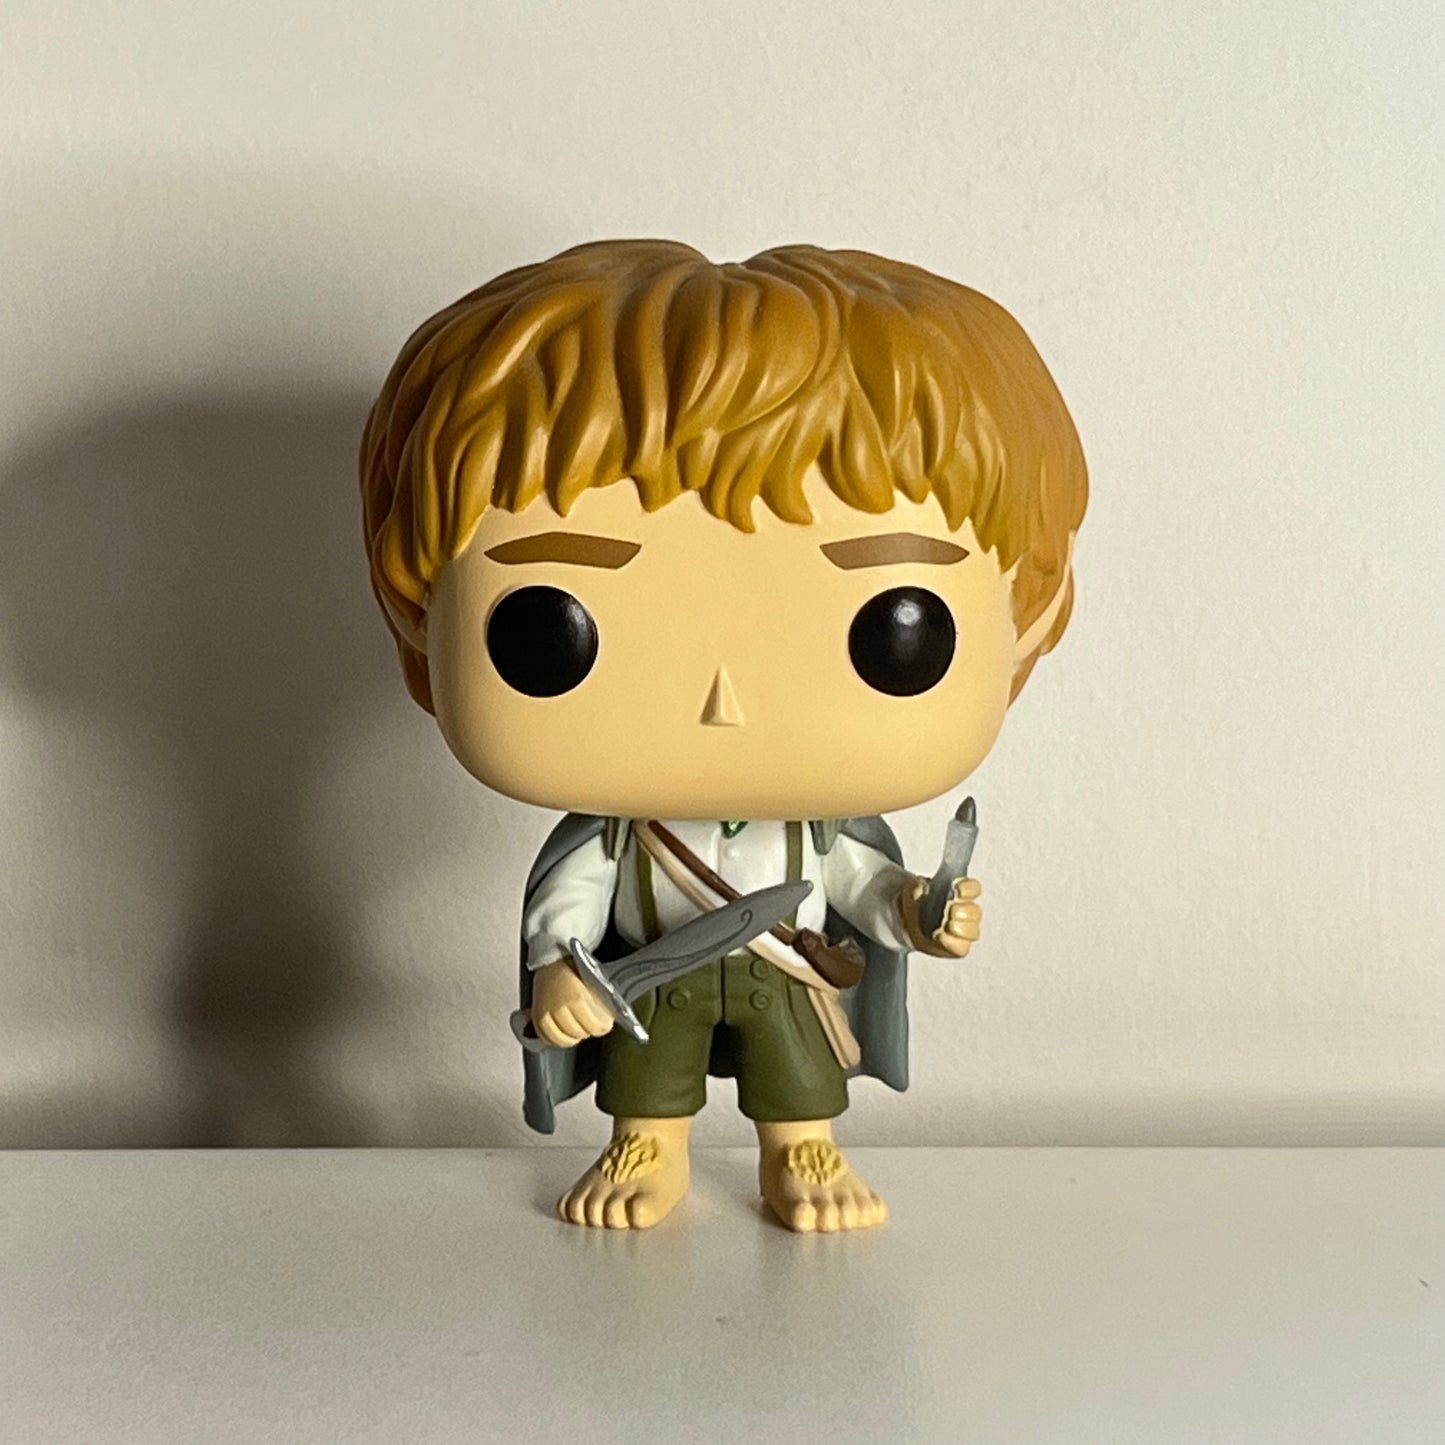 The Lord of the Rings - Samwise Gamgee 445 Funko Pop (No Box or Insert Included)